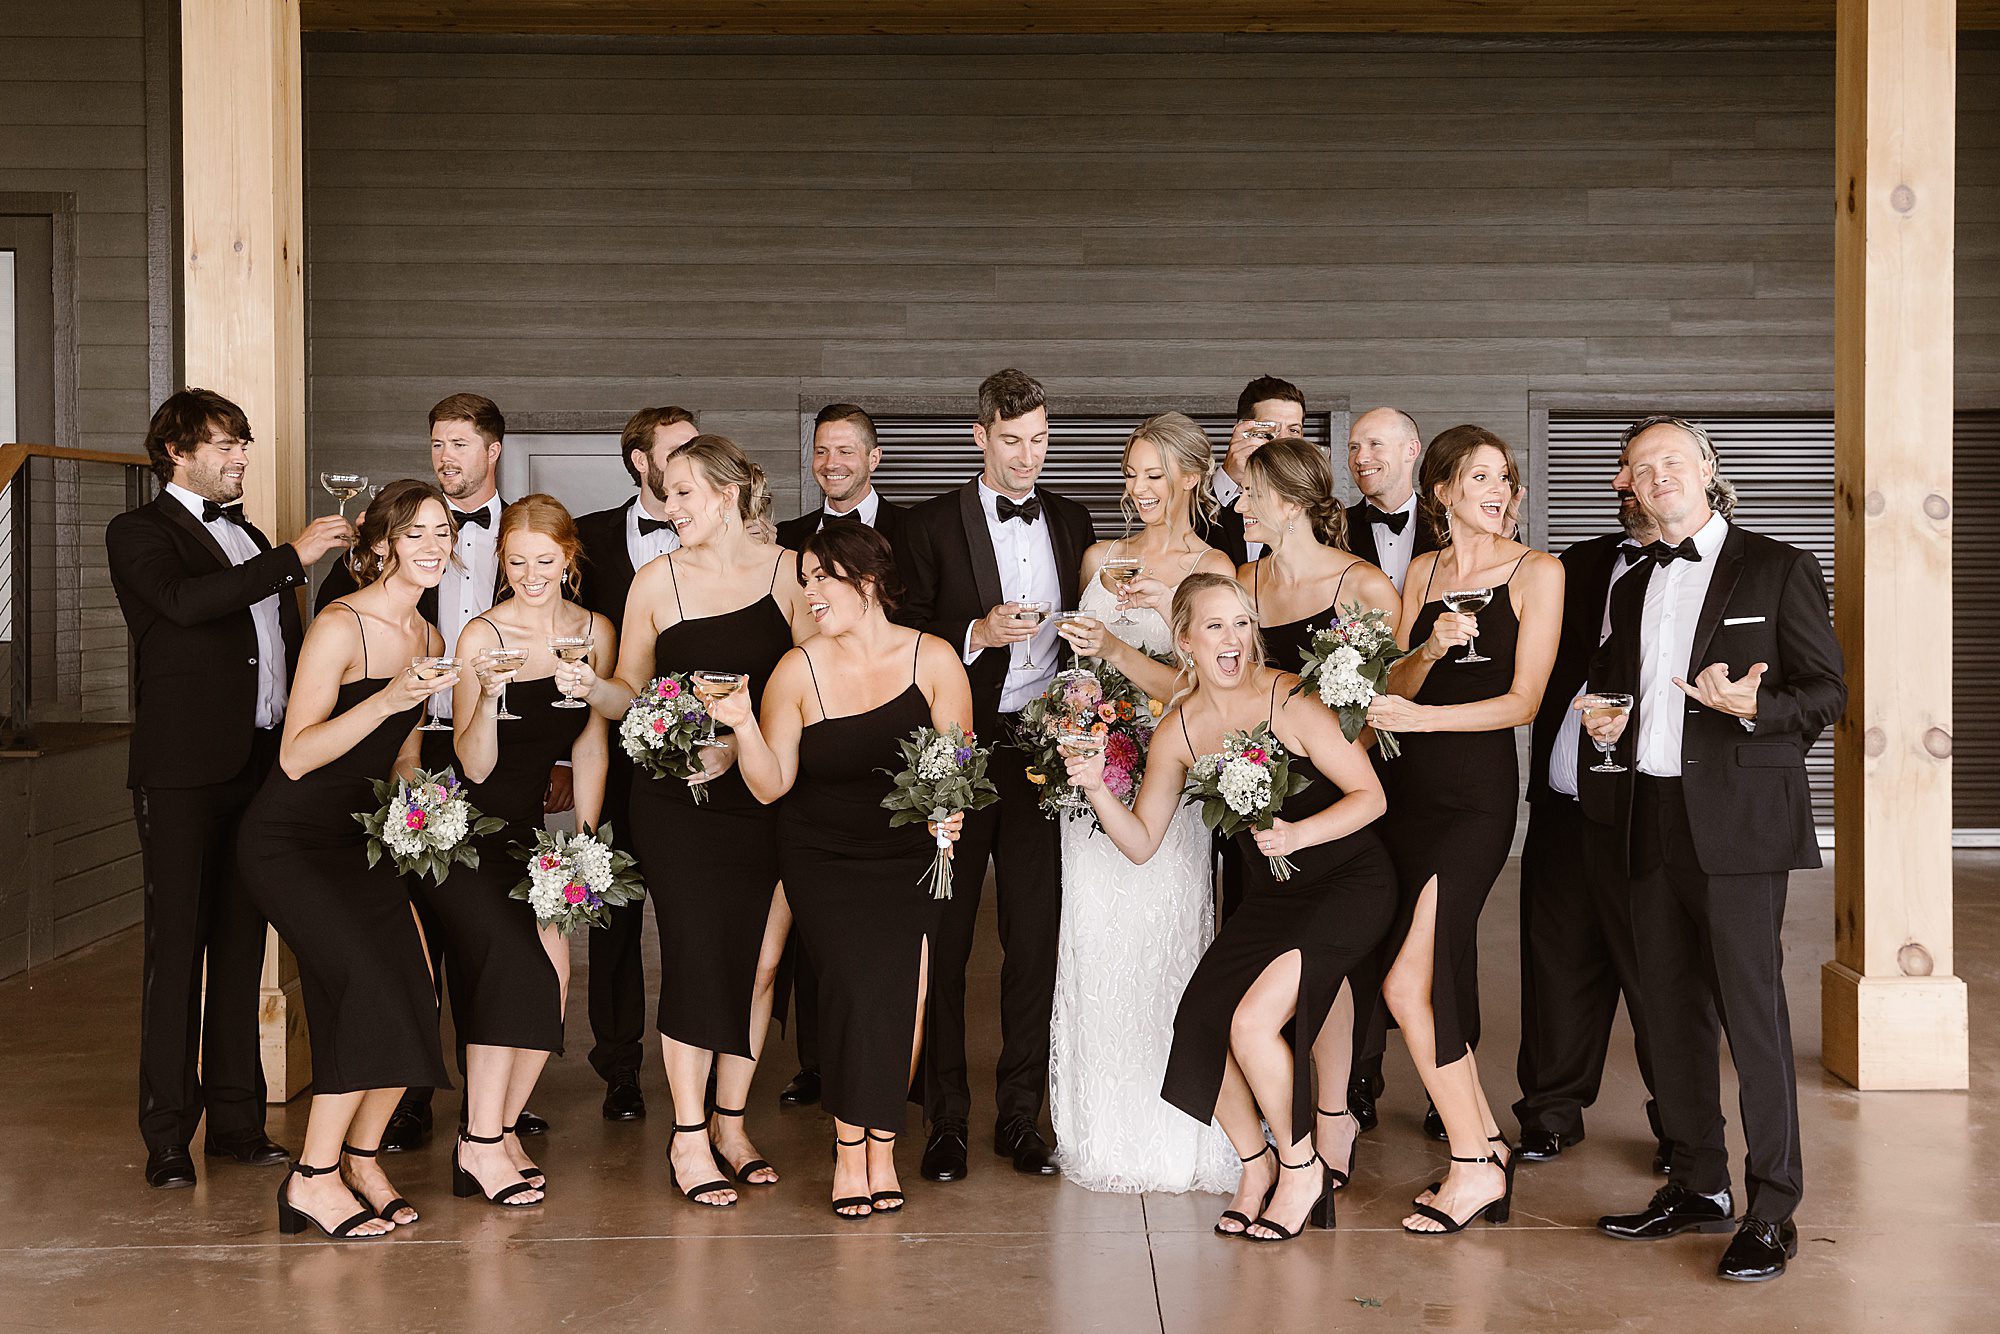 Trust a Professional Wedding Photographer and Say Goodby to Shot Lists